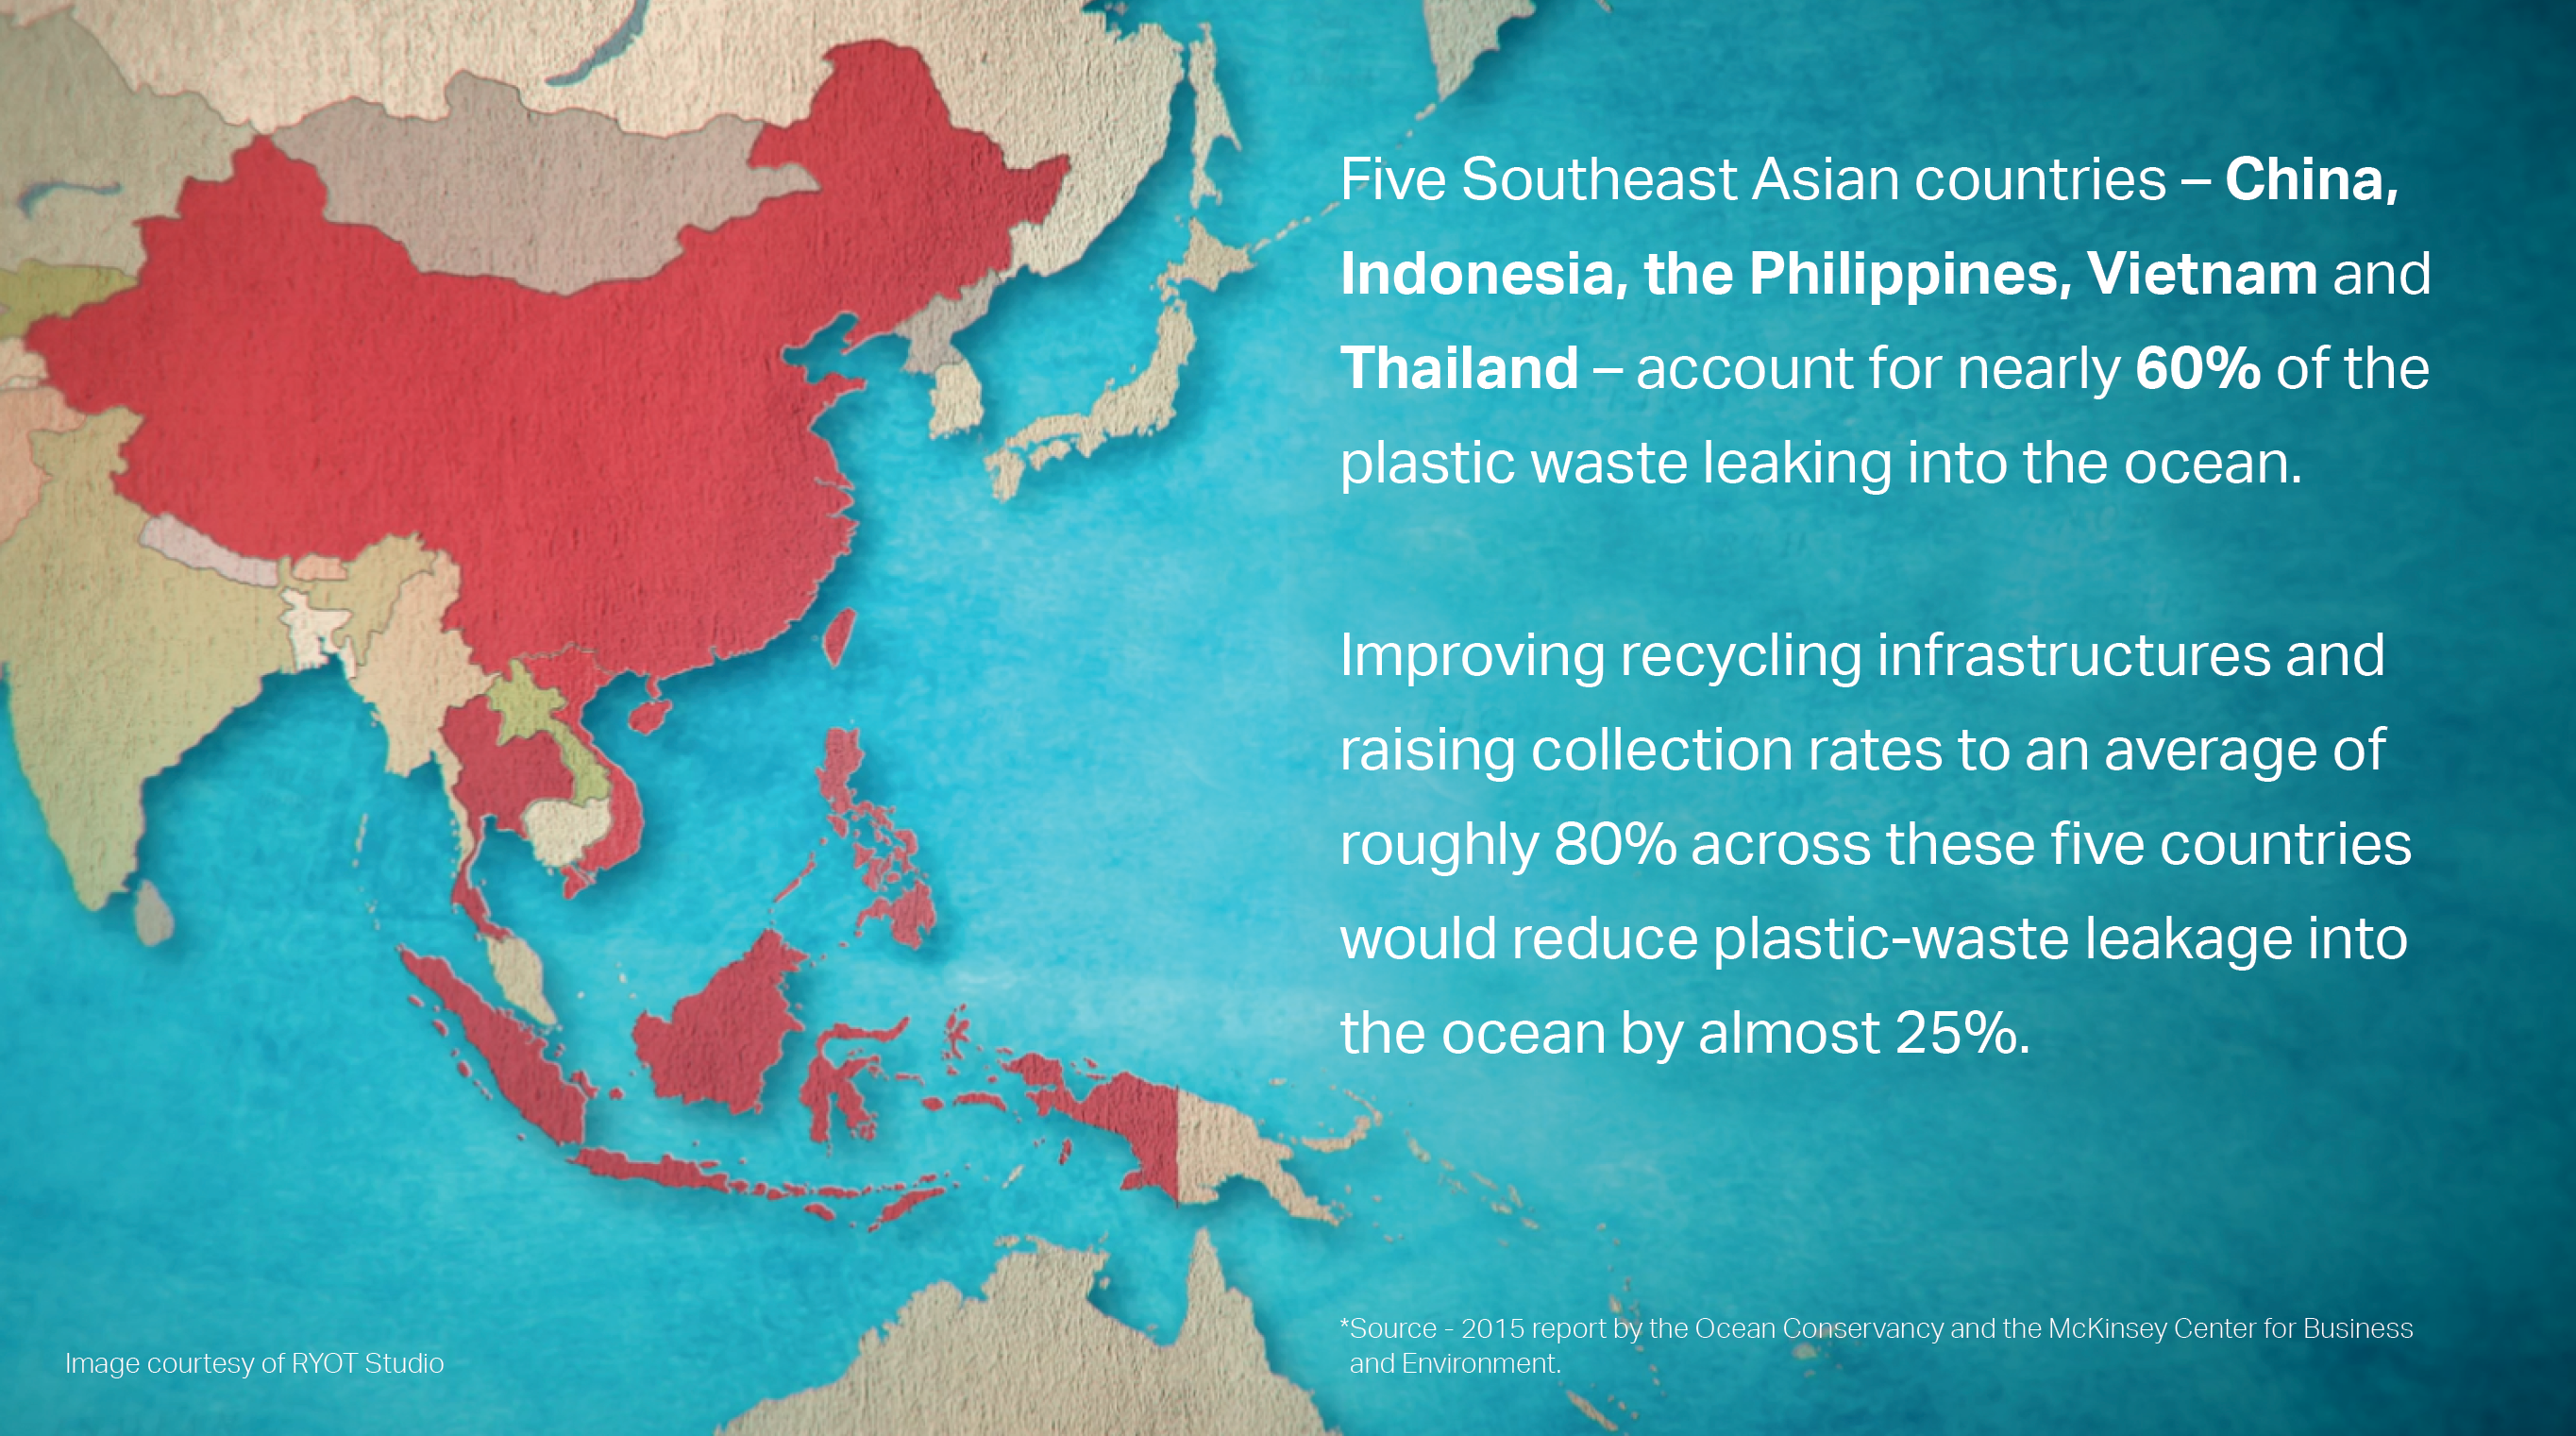 Improving recycling infrastructures is key to keeping plastic out of the ocean.